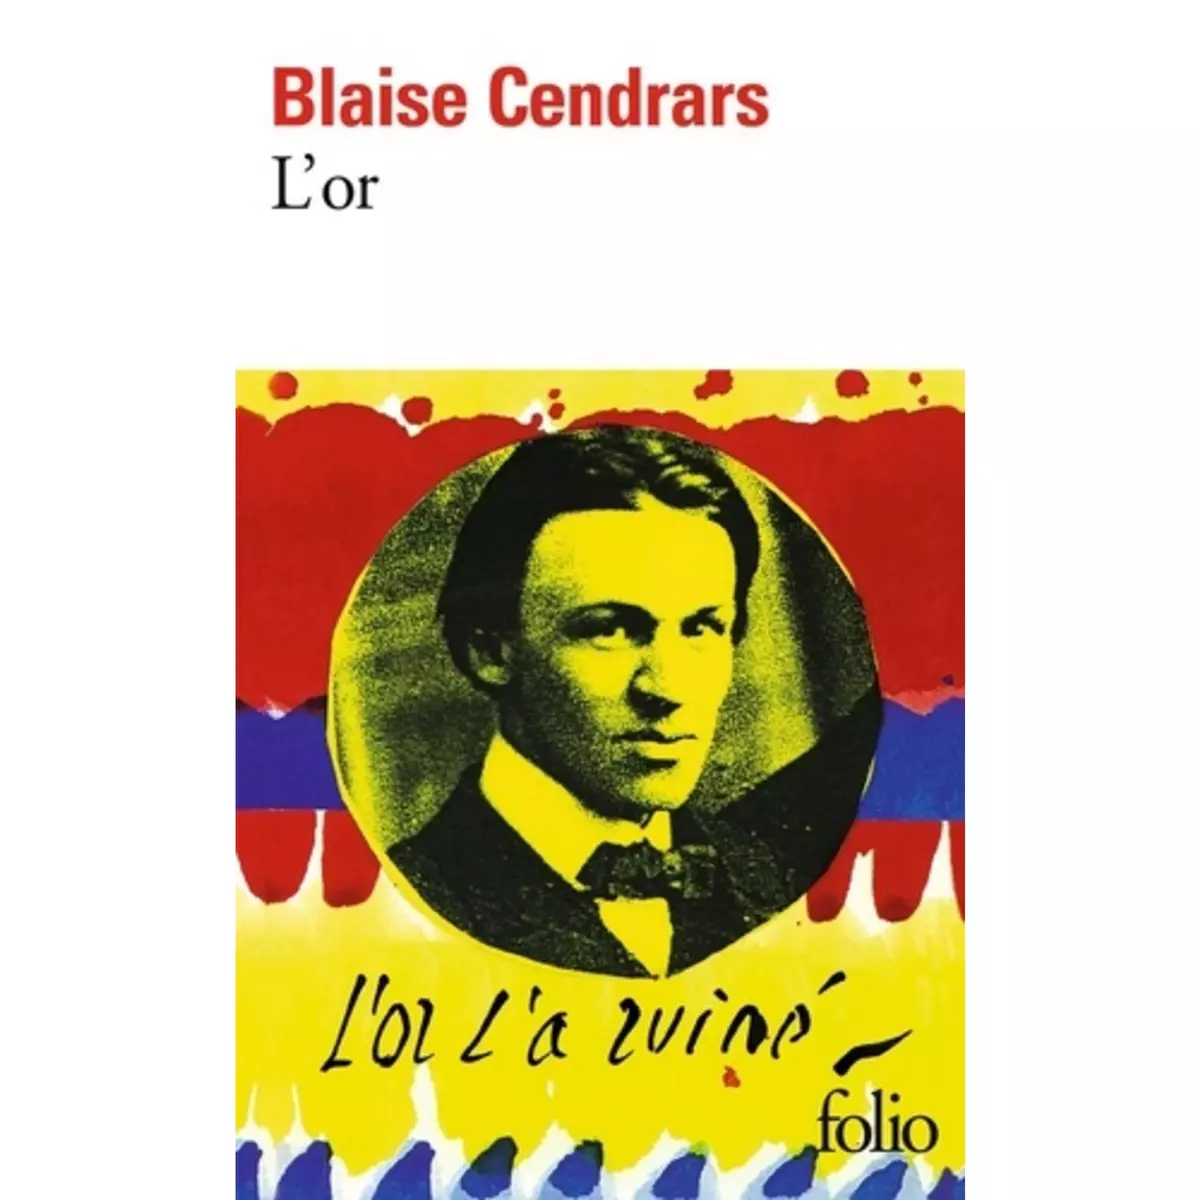  L'OR, Cendrars Blaise